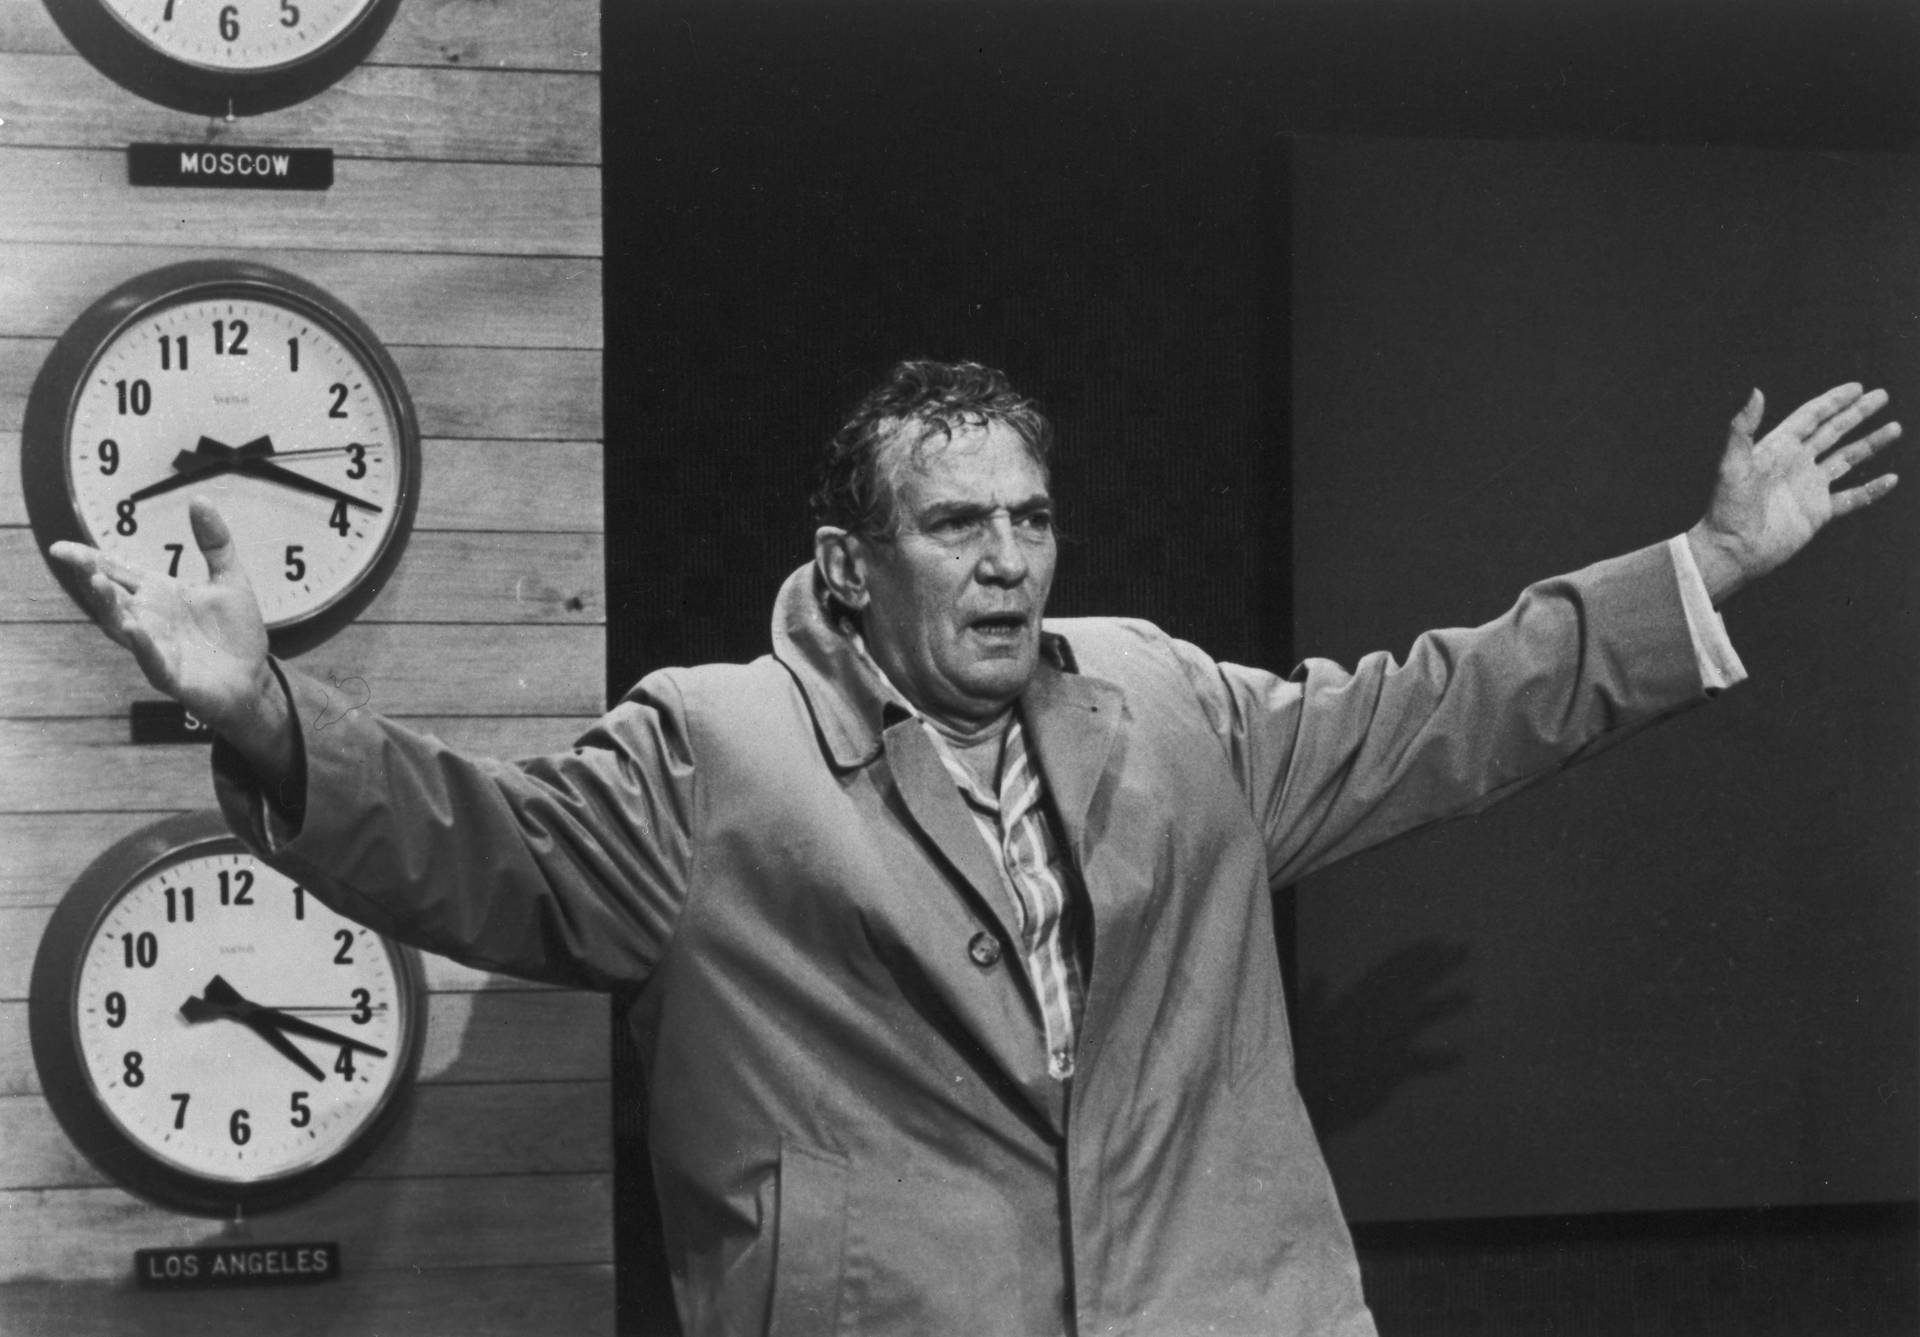 Peter Finch in his iconic role as Howard Beale in the 1976 film, Network. Wallpaper